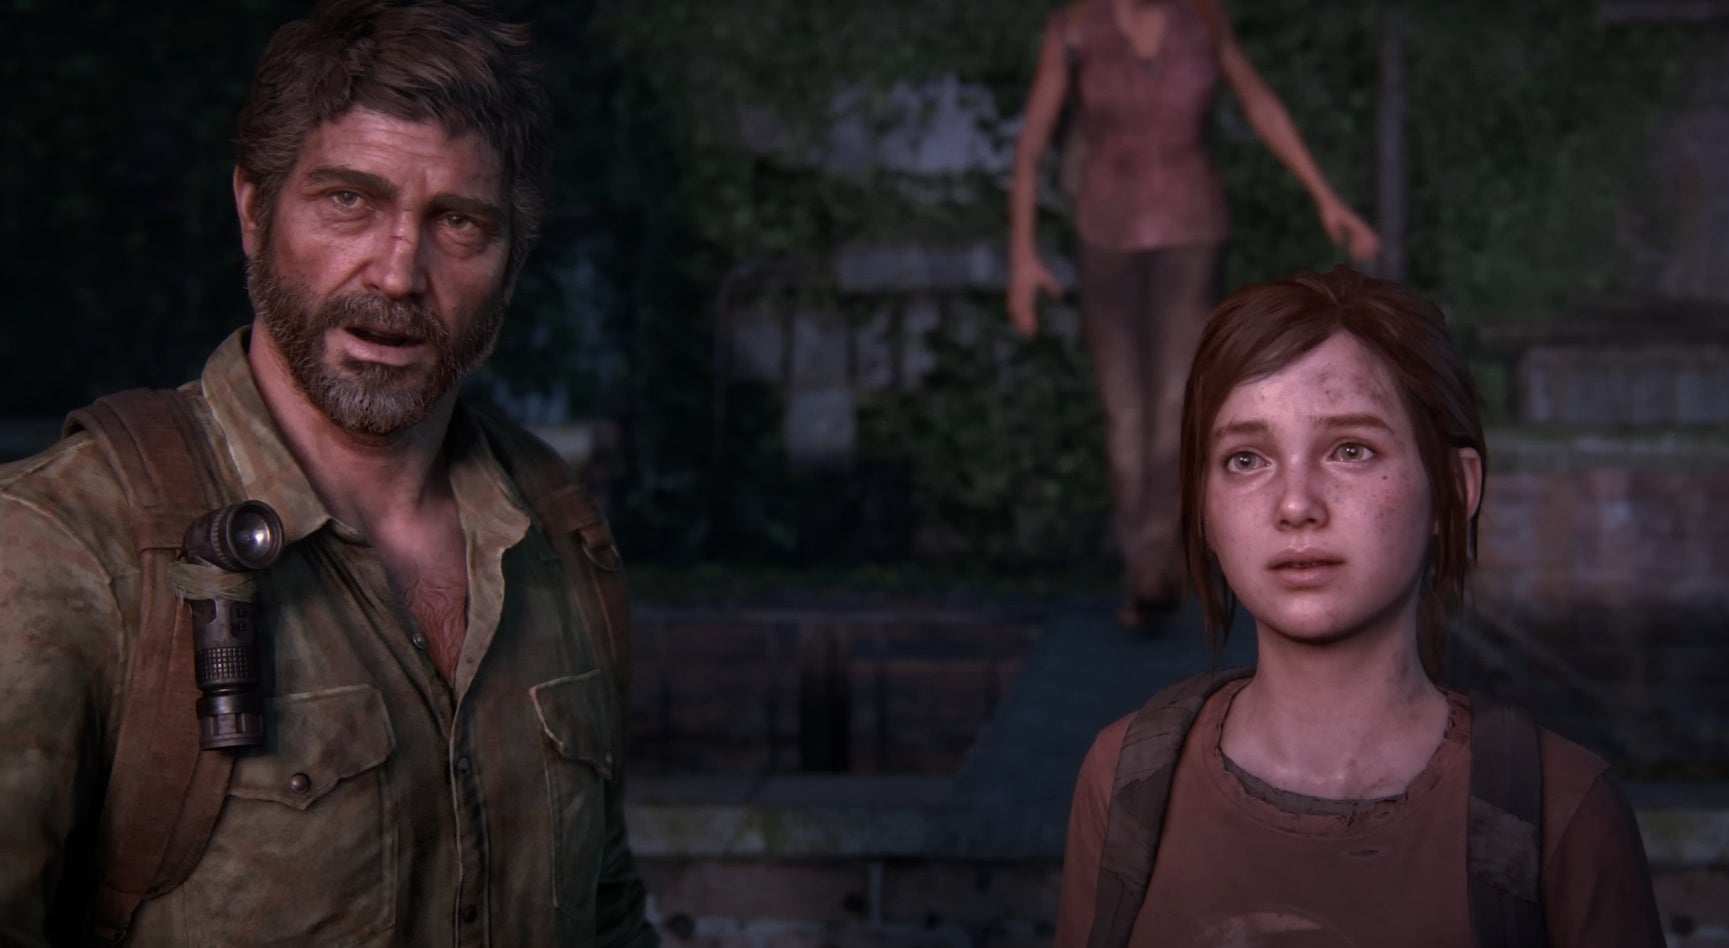 Beardy man Joel and young girl Ellie gaze out towards the camera, over an unseen cityscape, in The Last Of Us: Part 1.